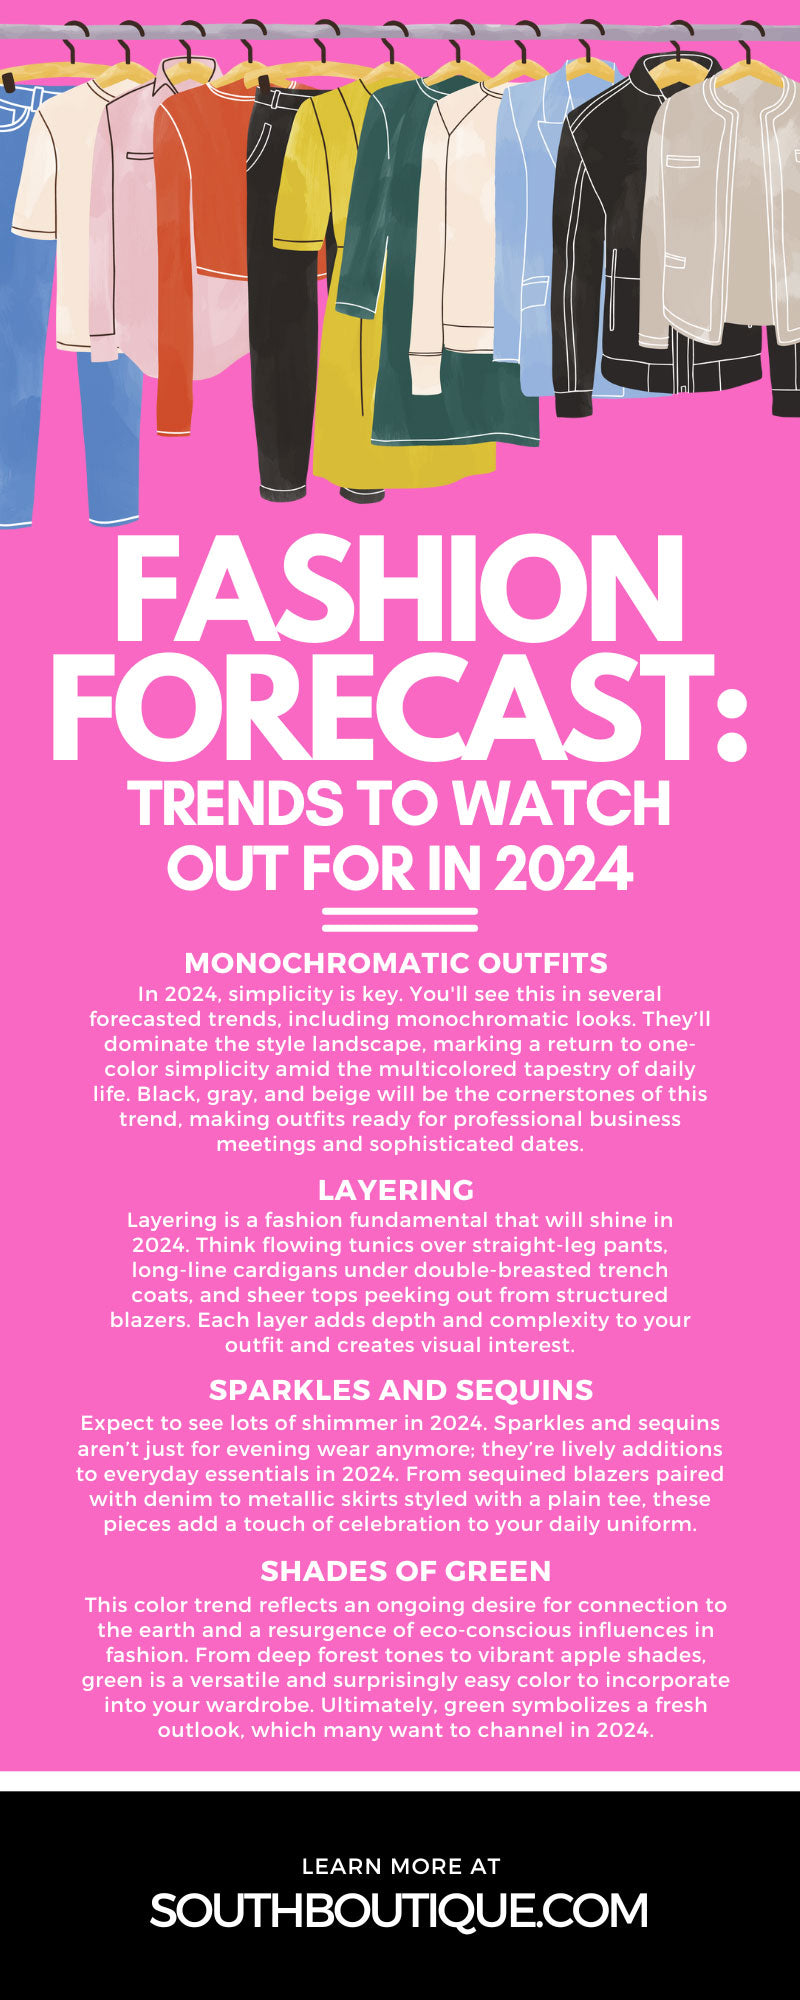 Fashion Forecast: Trends To Watch Out for in 2024